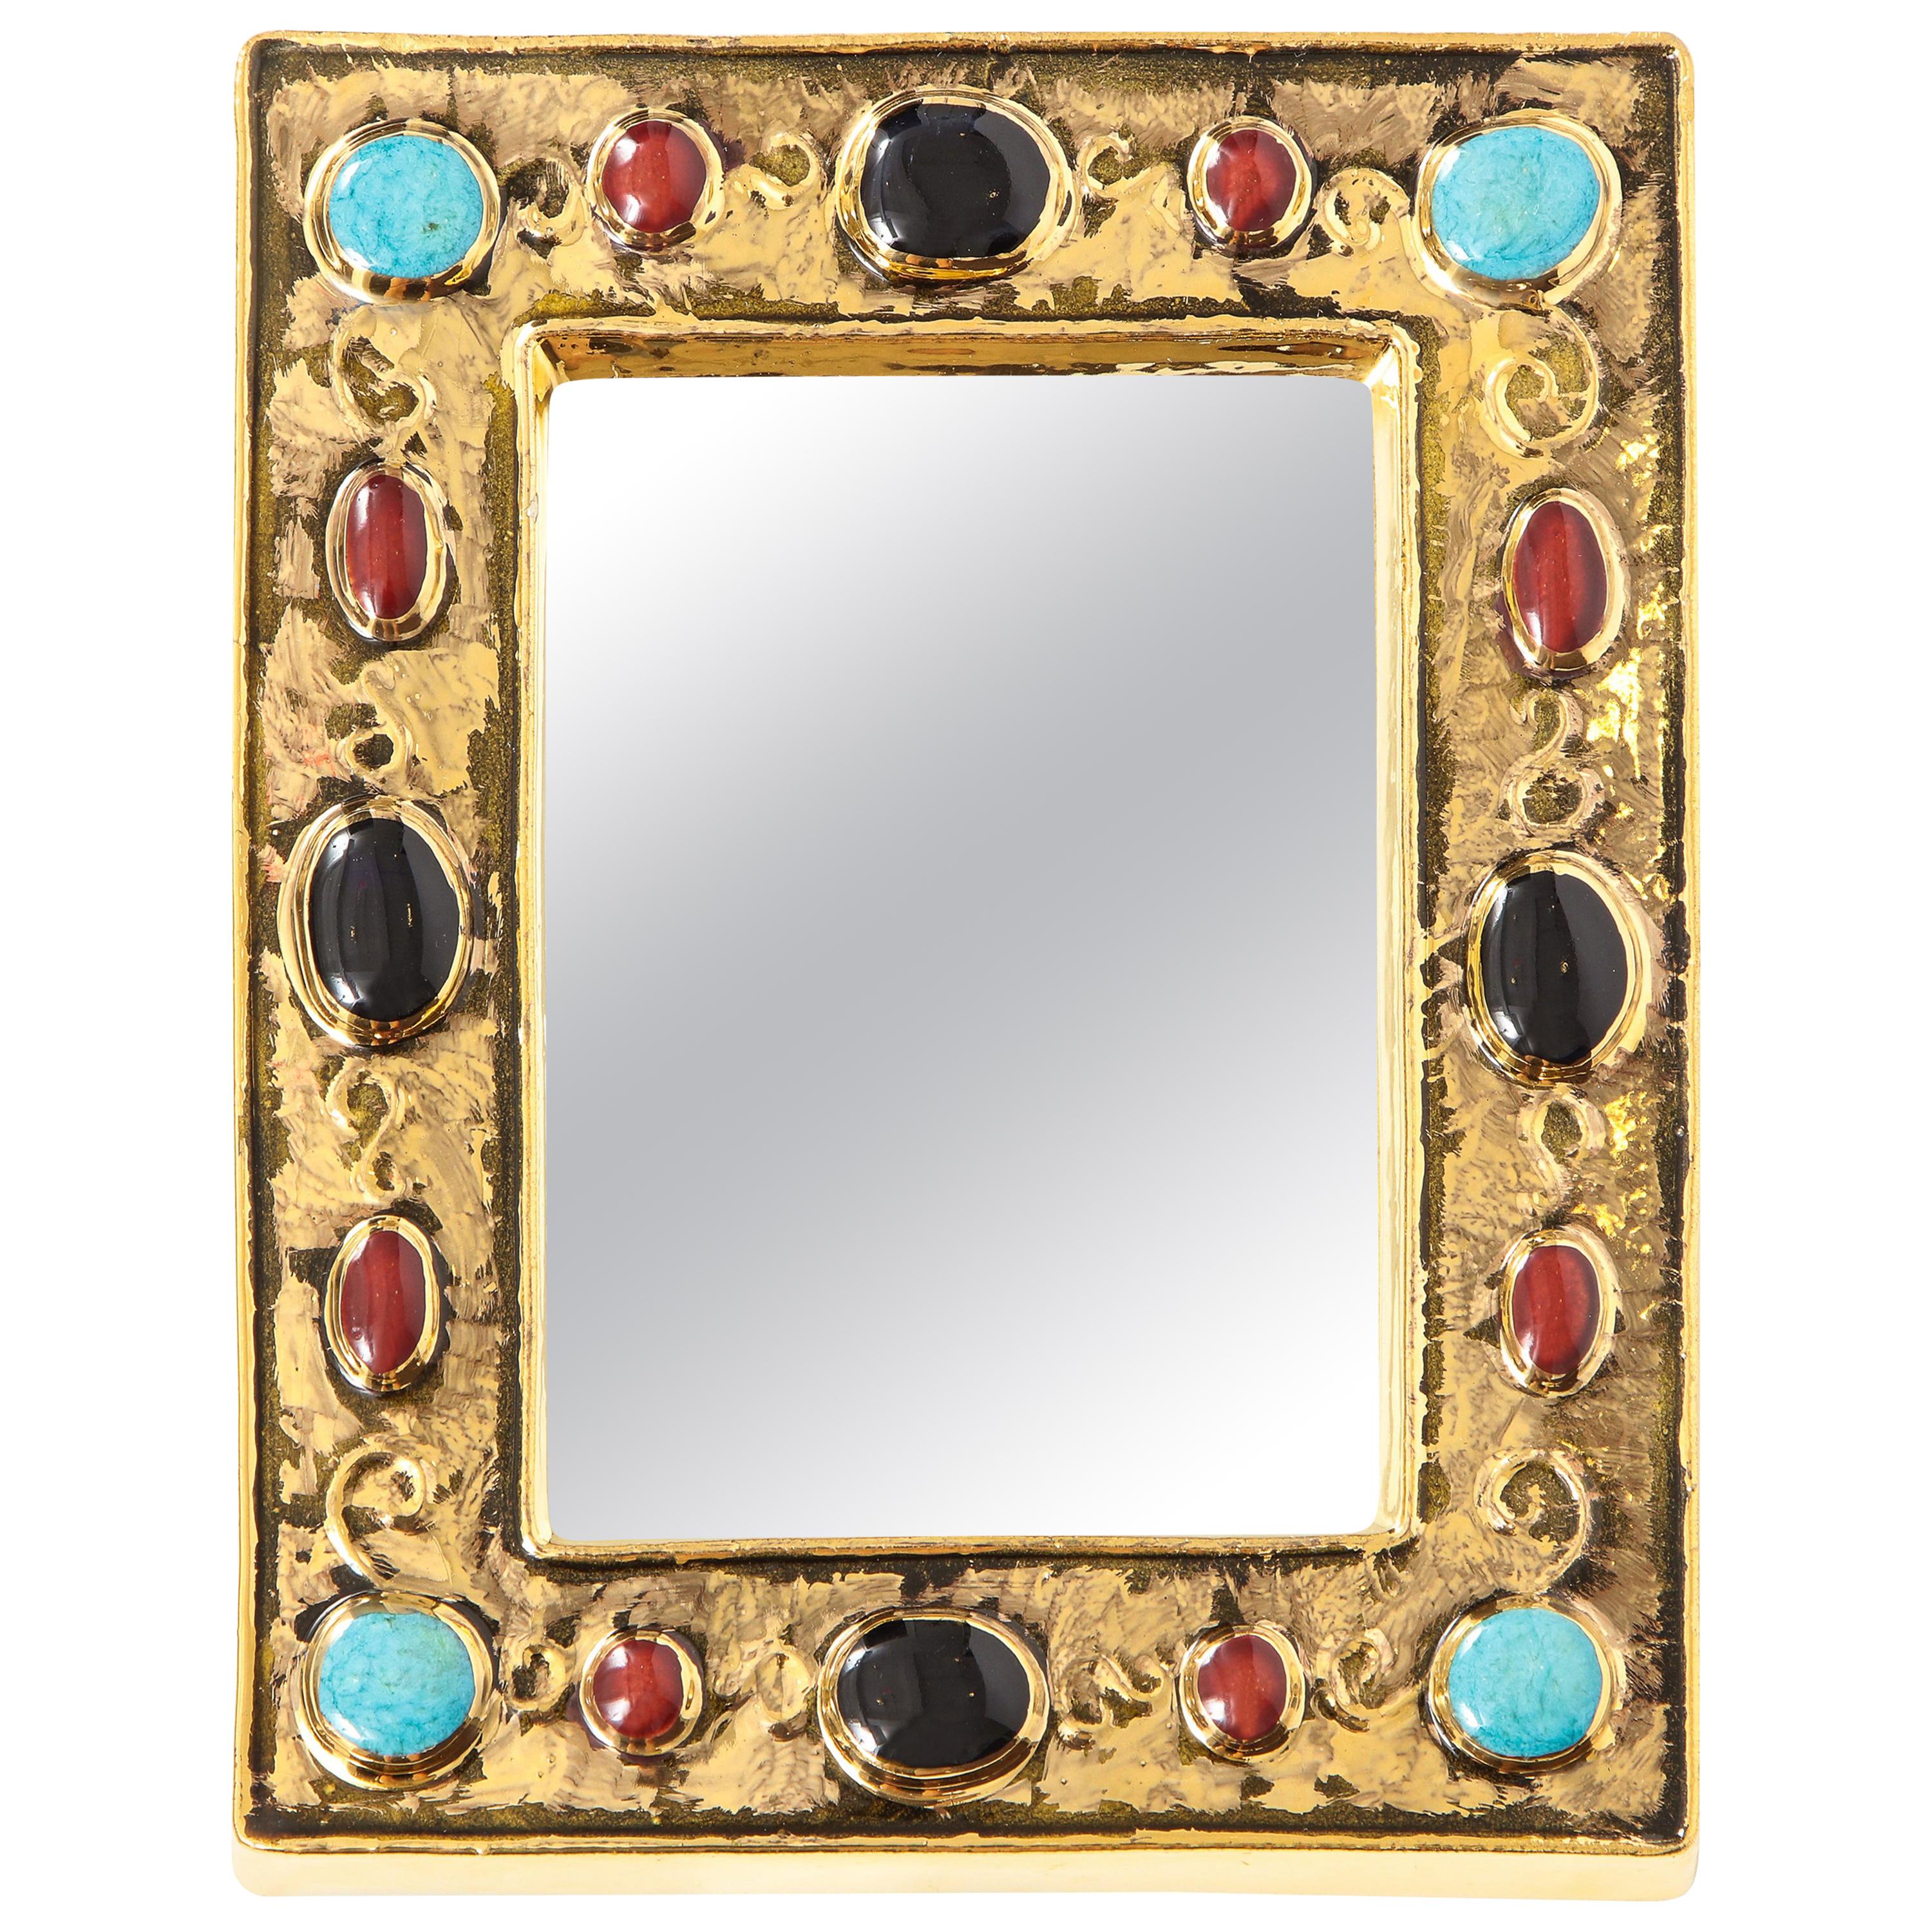 Francois Lembo mirror, ceramic, gold, turquoise, black and red, jeweled, signed. Small scale gold glazed mirror with embedded jewel decoration. Signed: F. Lembo with incised signature on the back.

A native of Vallauris François Lembo started his